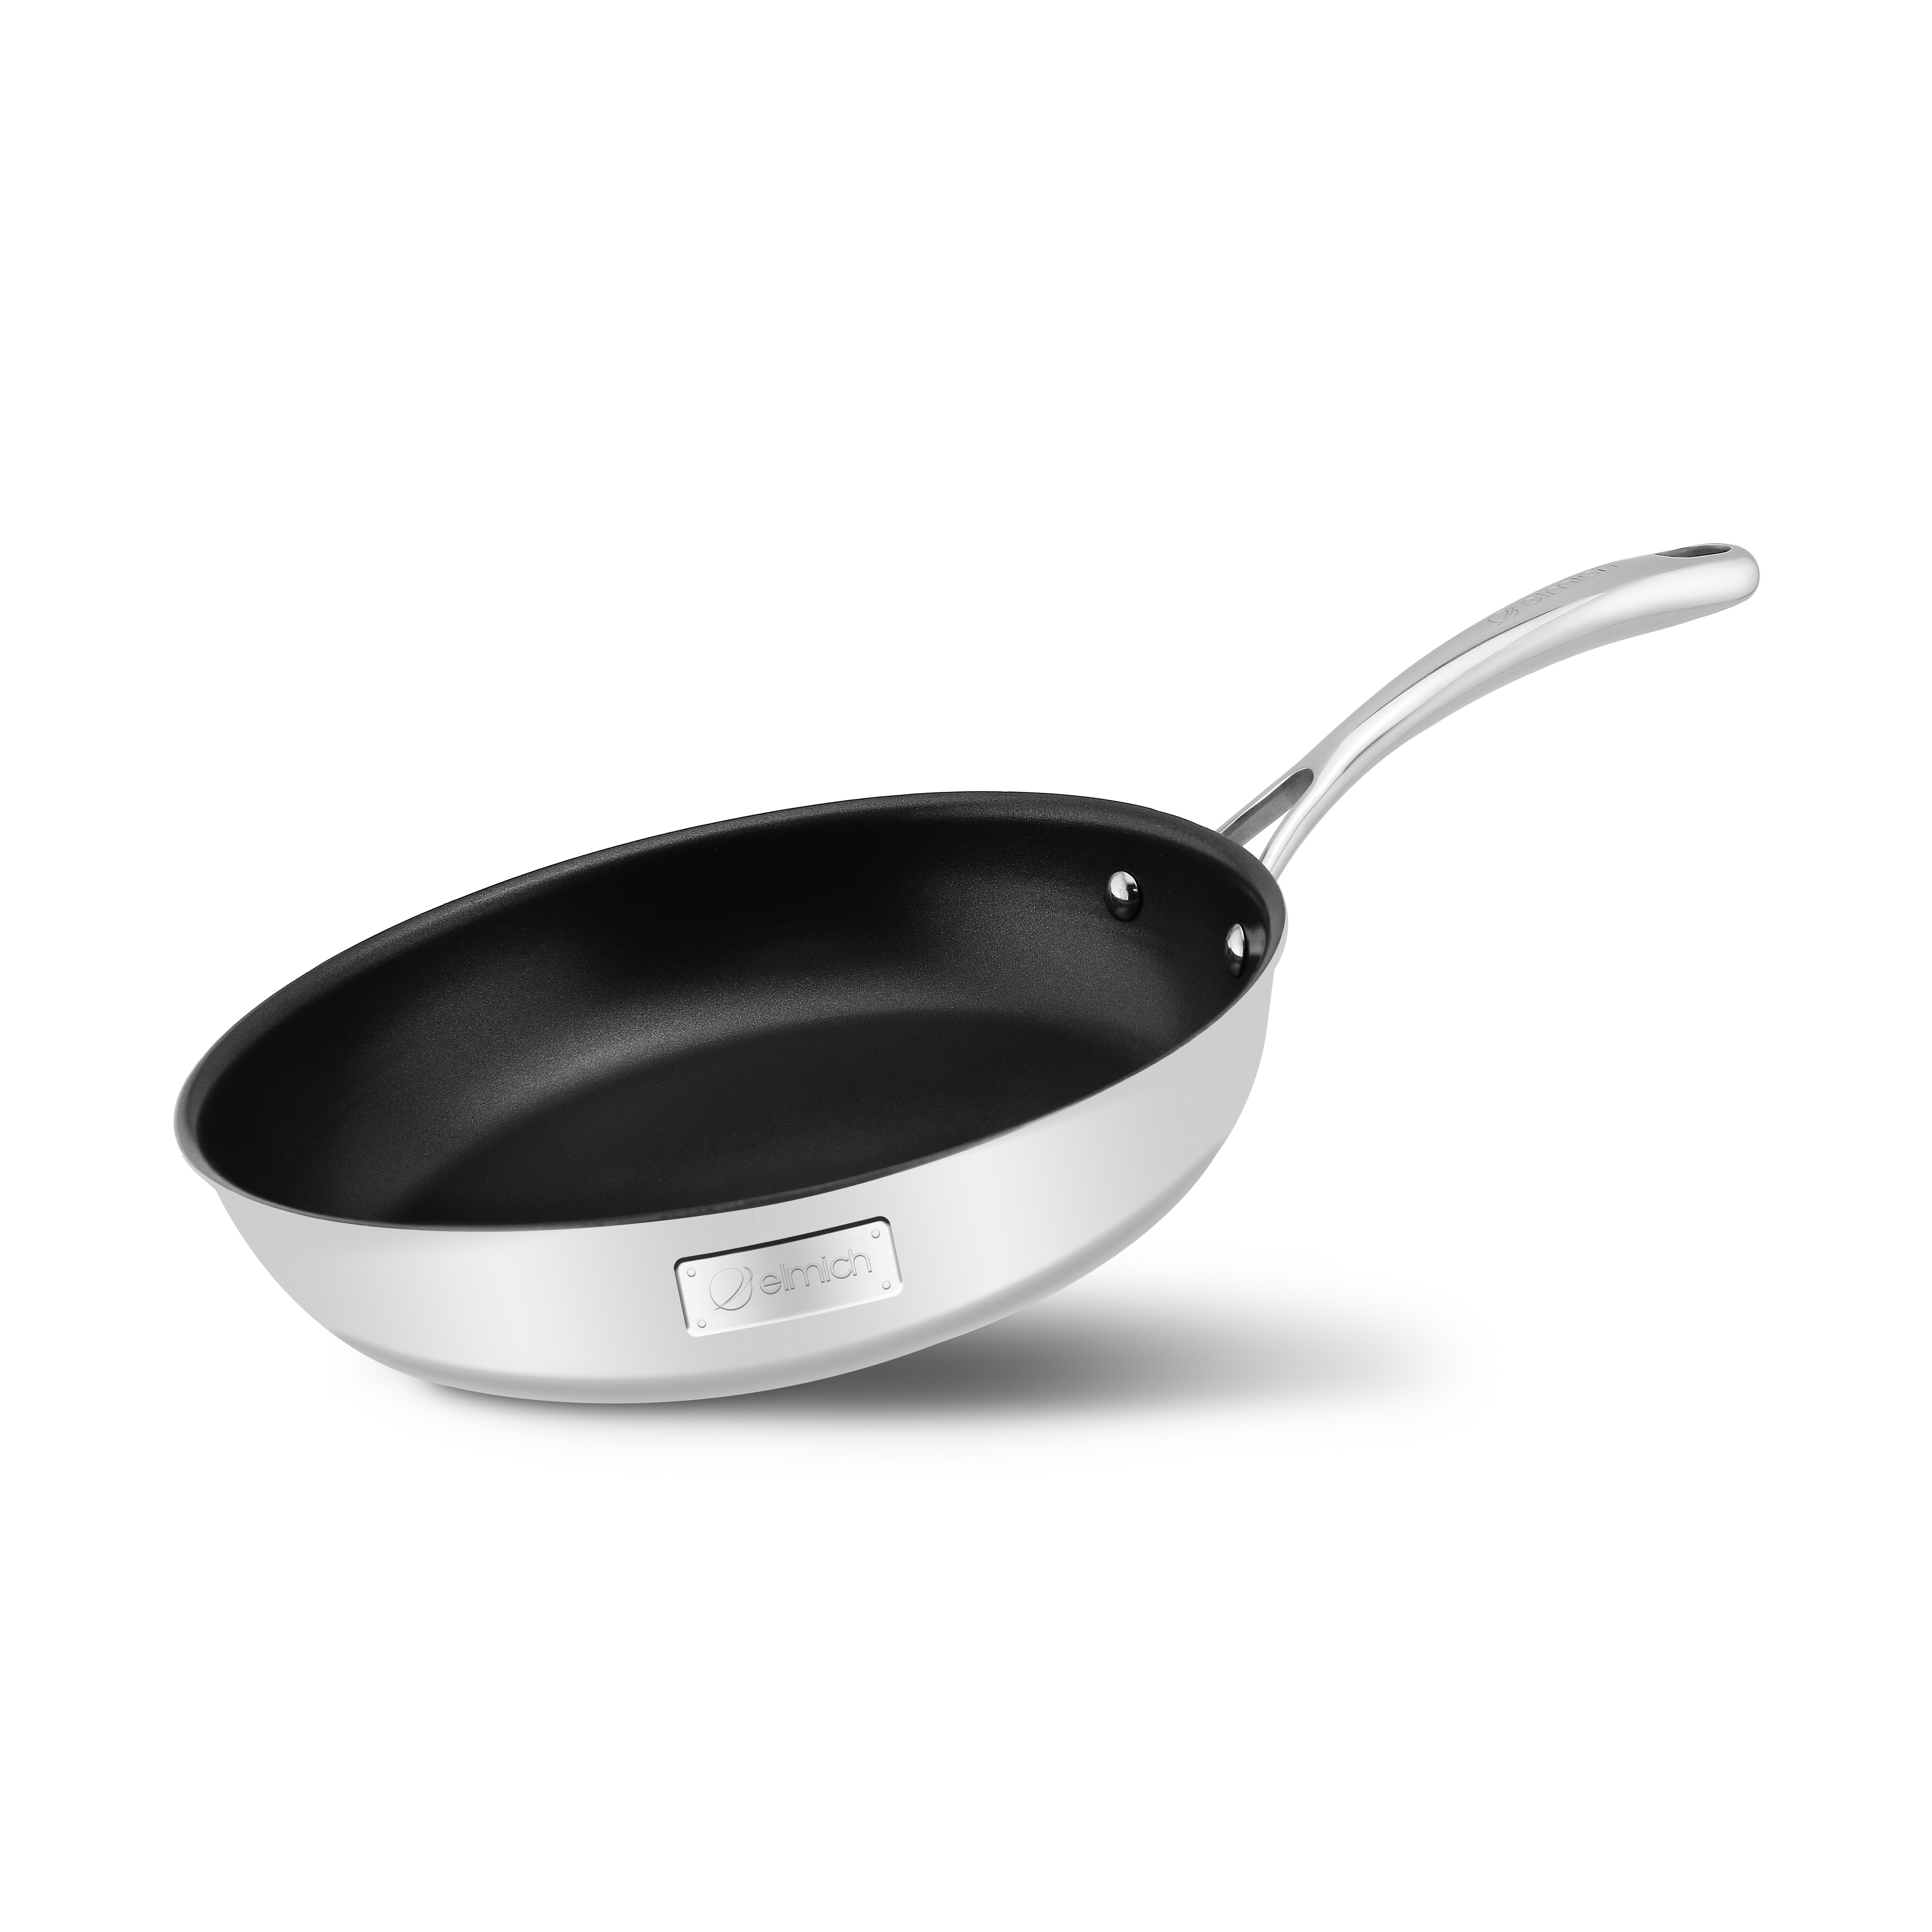 High-grade stainless steel pan with 2 layers of seamless bottom Tri-Max 28cm